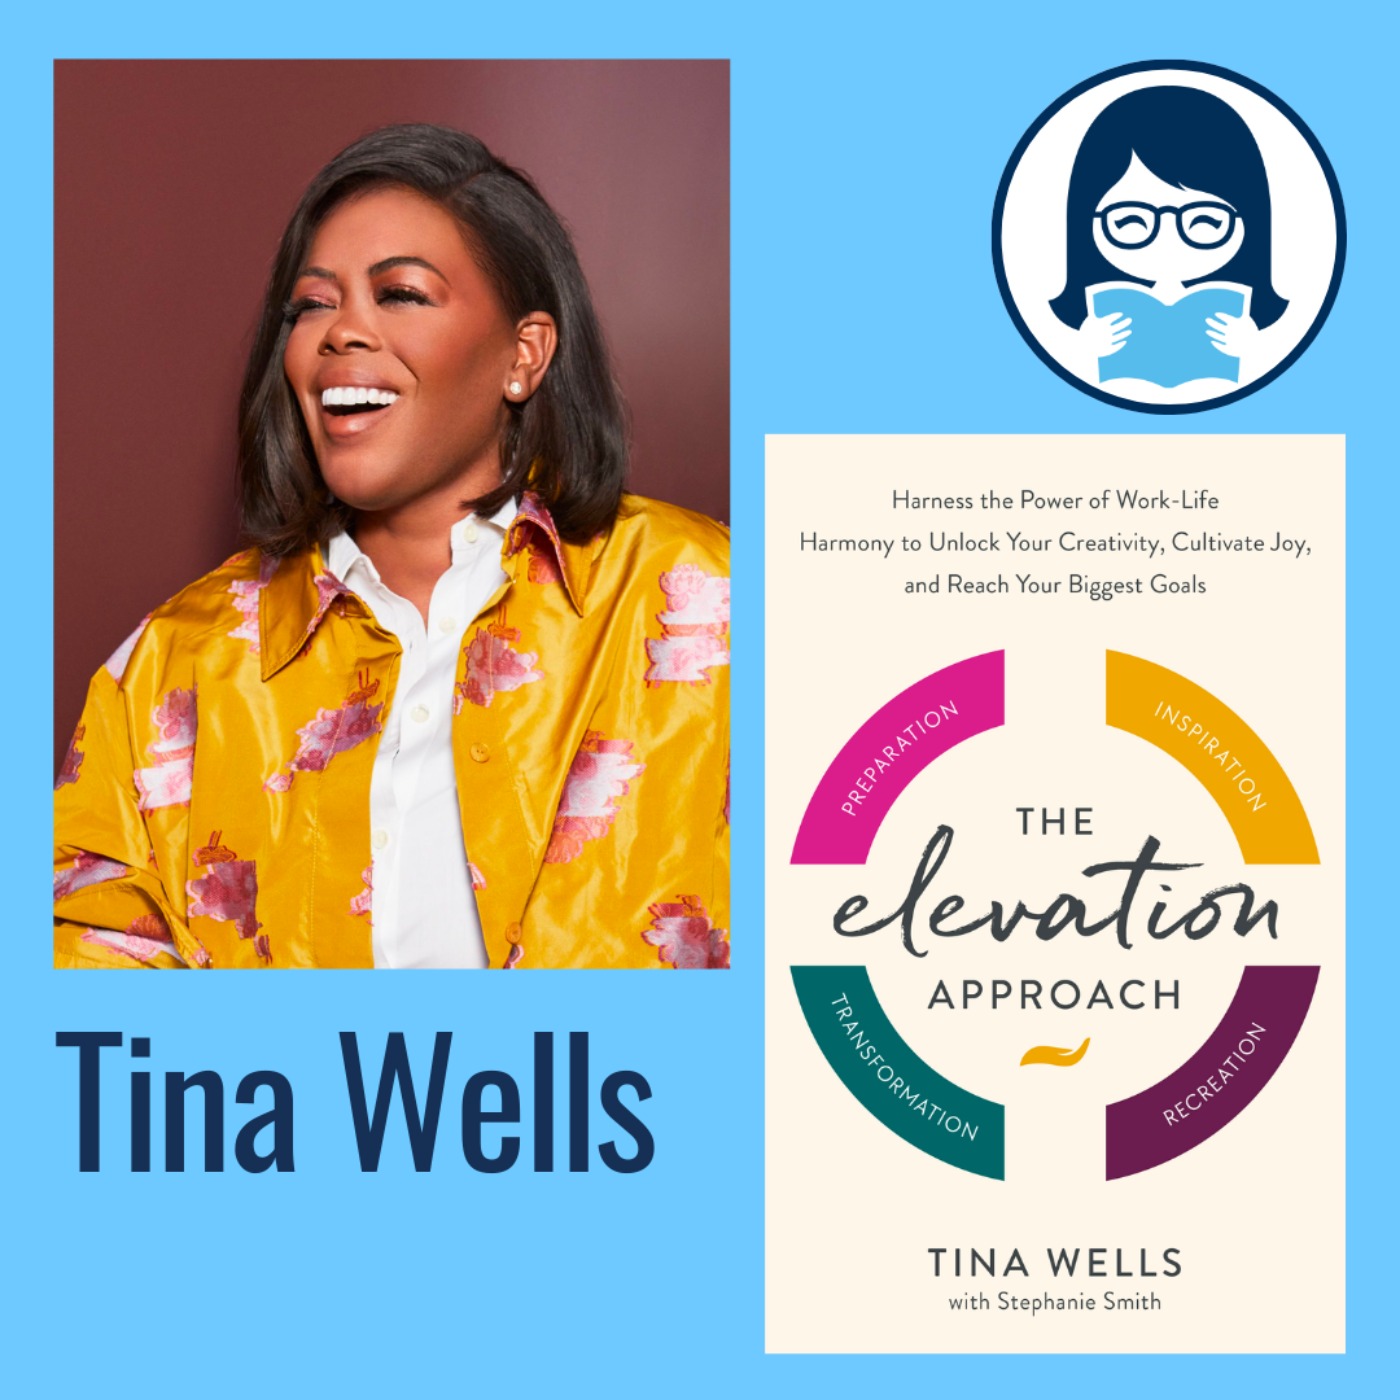 Tina Wells, THE ELEVATION APPROACH: Harness the Power of Work-Life Harmony to Unlock Your Creativity, Cultivate Joy, and Reach Your Biggest Goals